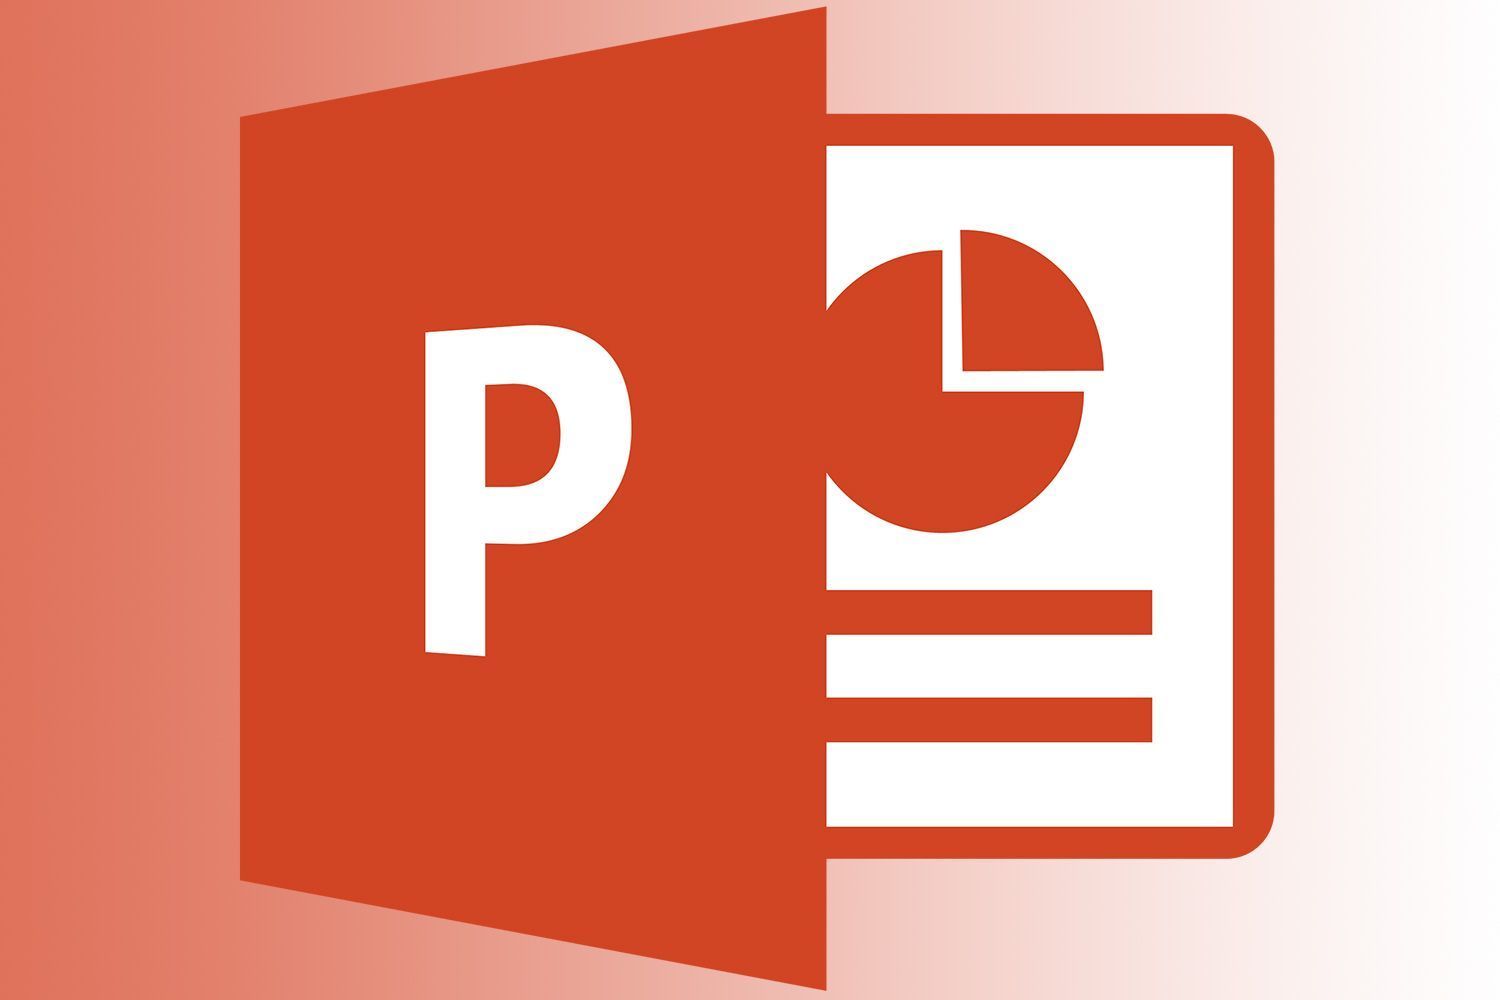 PowerPoint Infected With A New Malware In MS Office